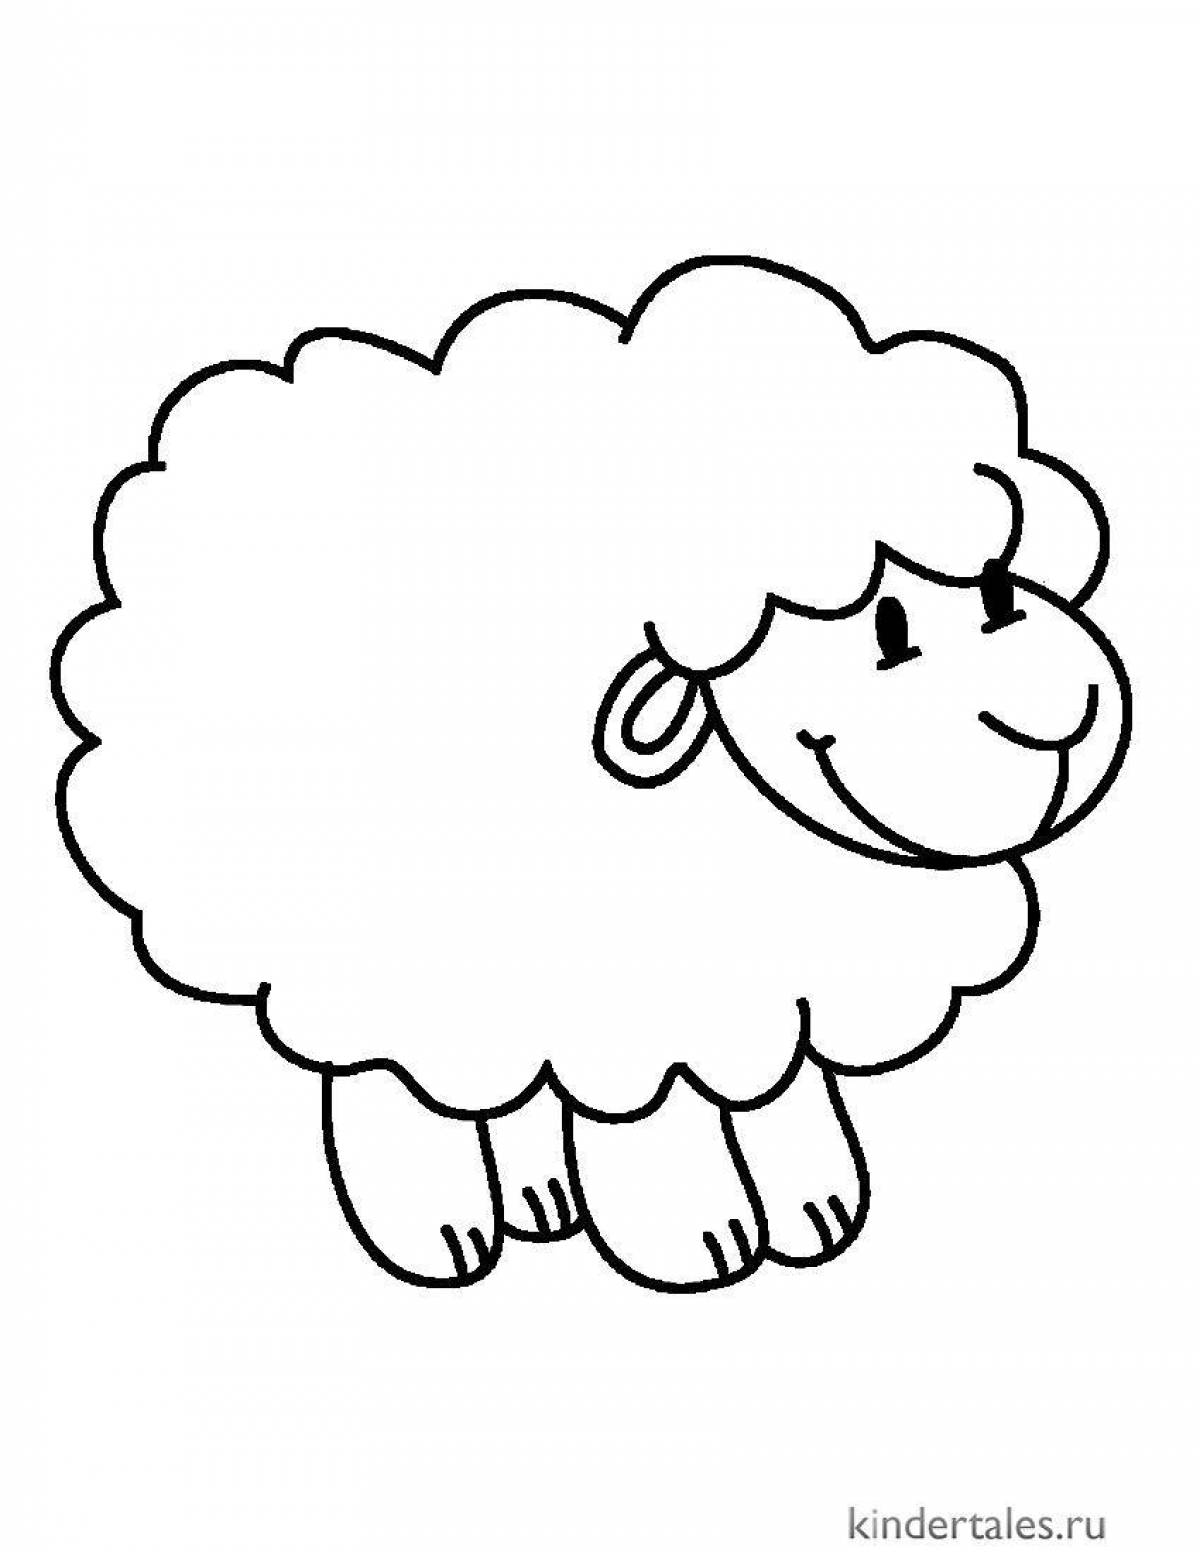 Charming sheep coloring book for children 2-3 years old